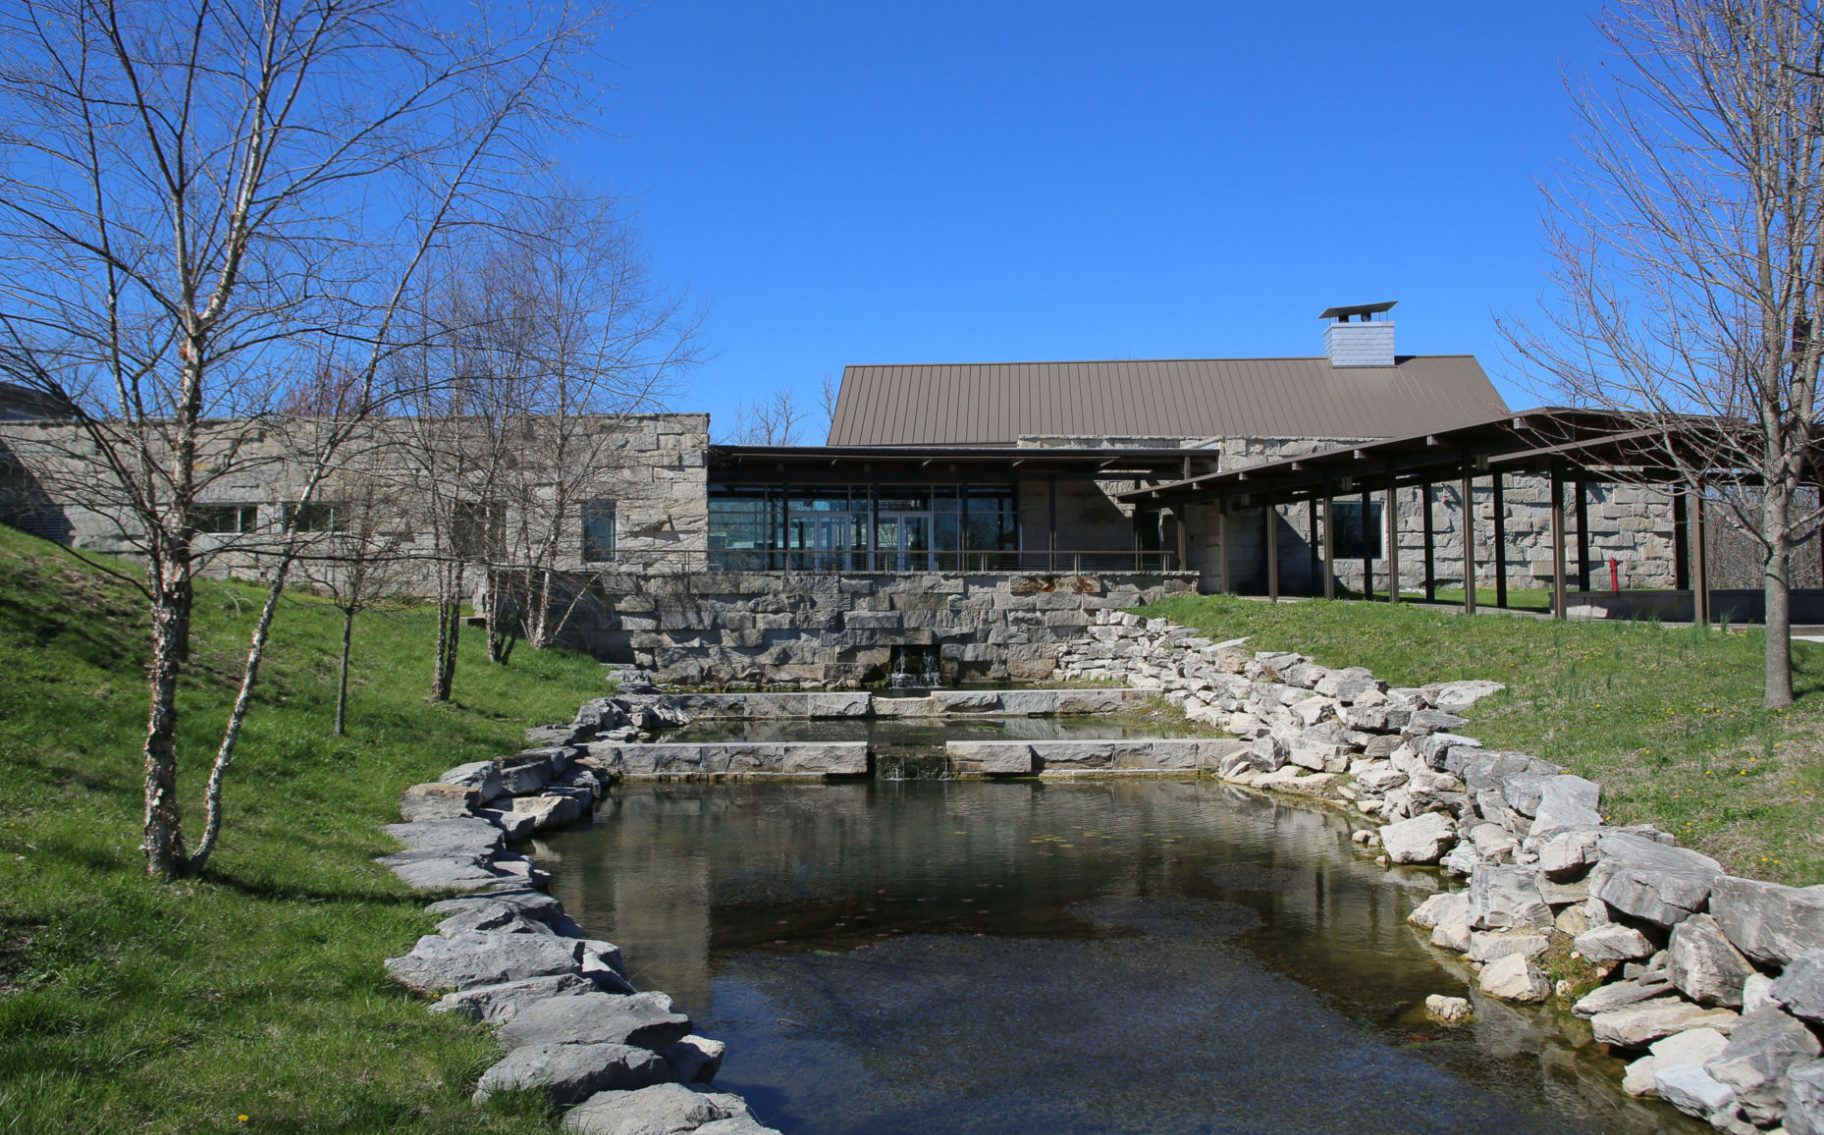 A large stone and wooden structure with a tiered waterfall feature in the ground in front of it.